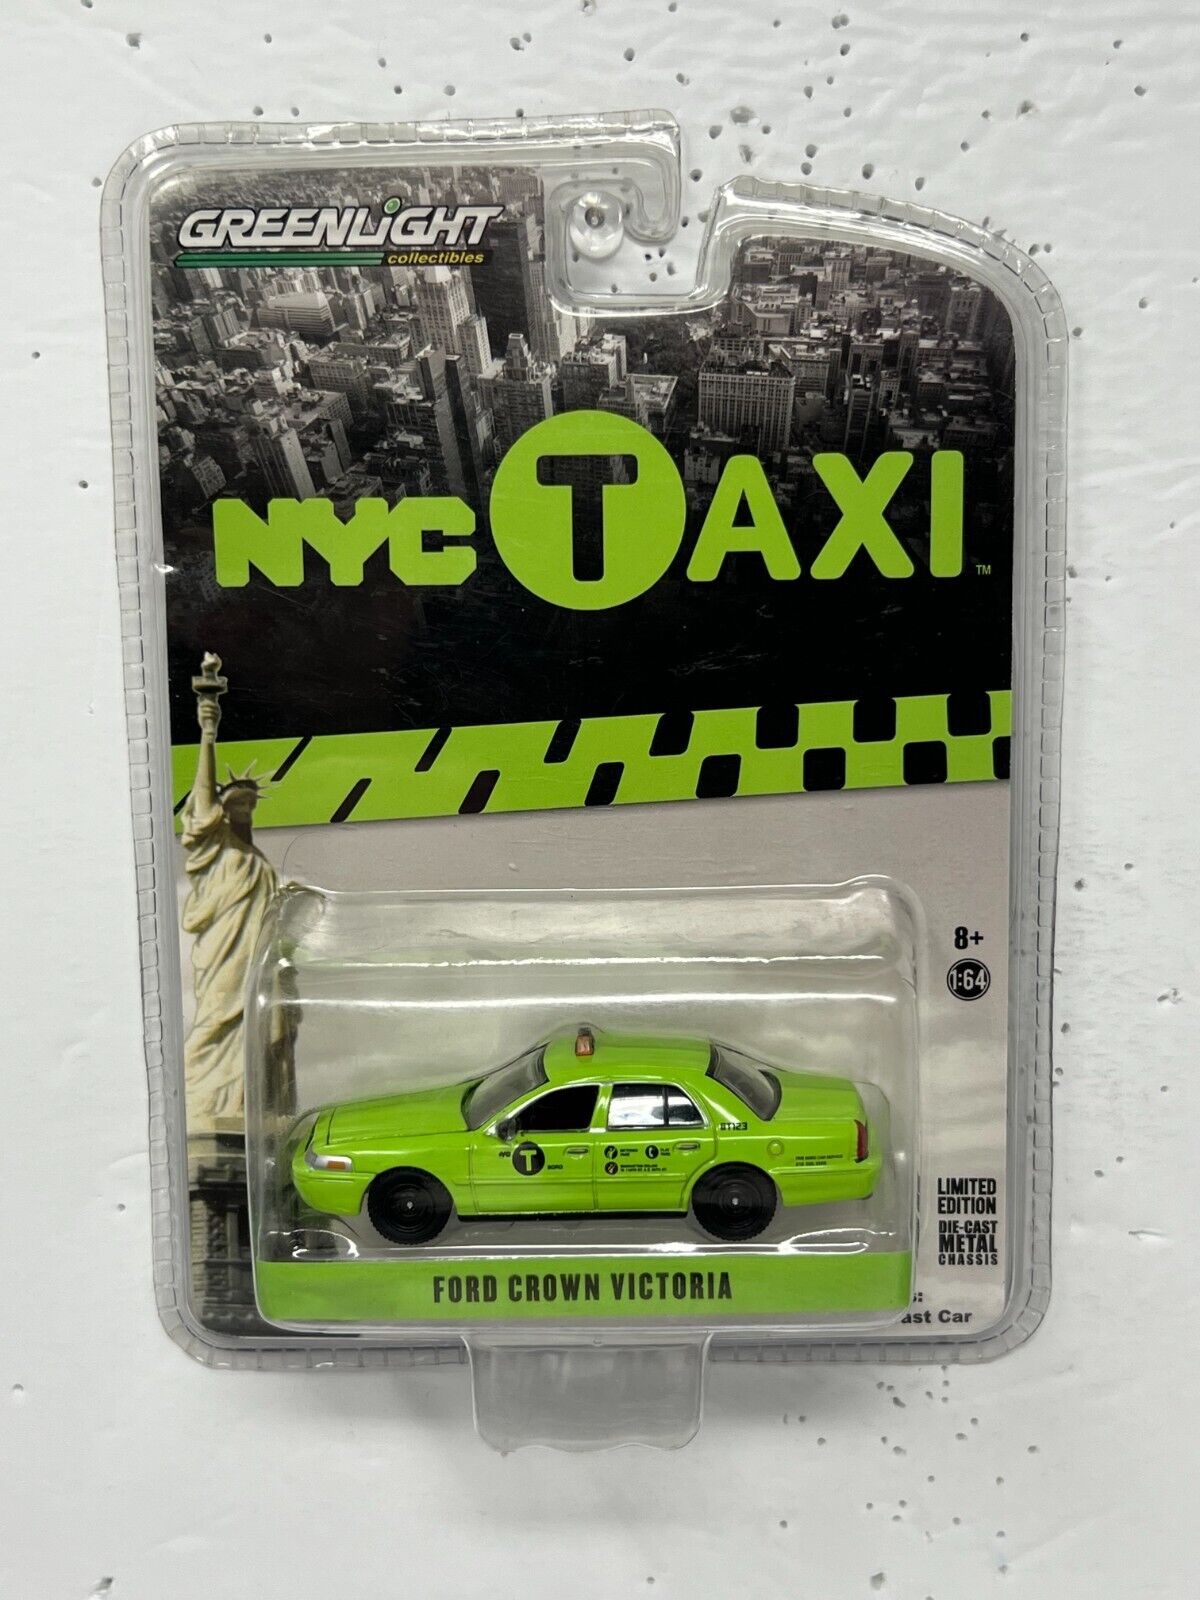 Greenlight NYC Taxi Ford Crown Victoria 1:64 Diecast